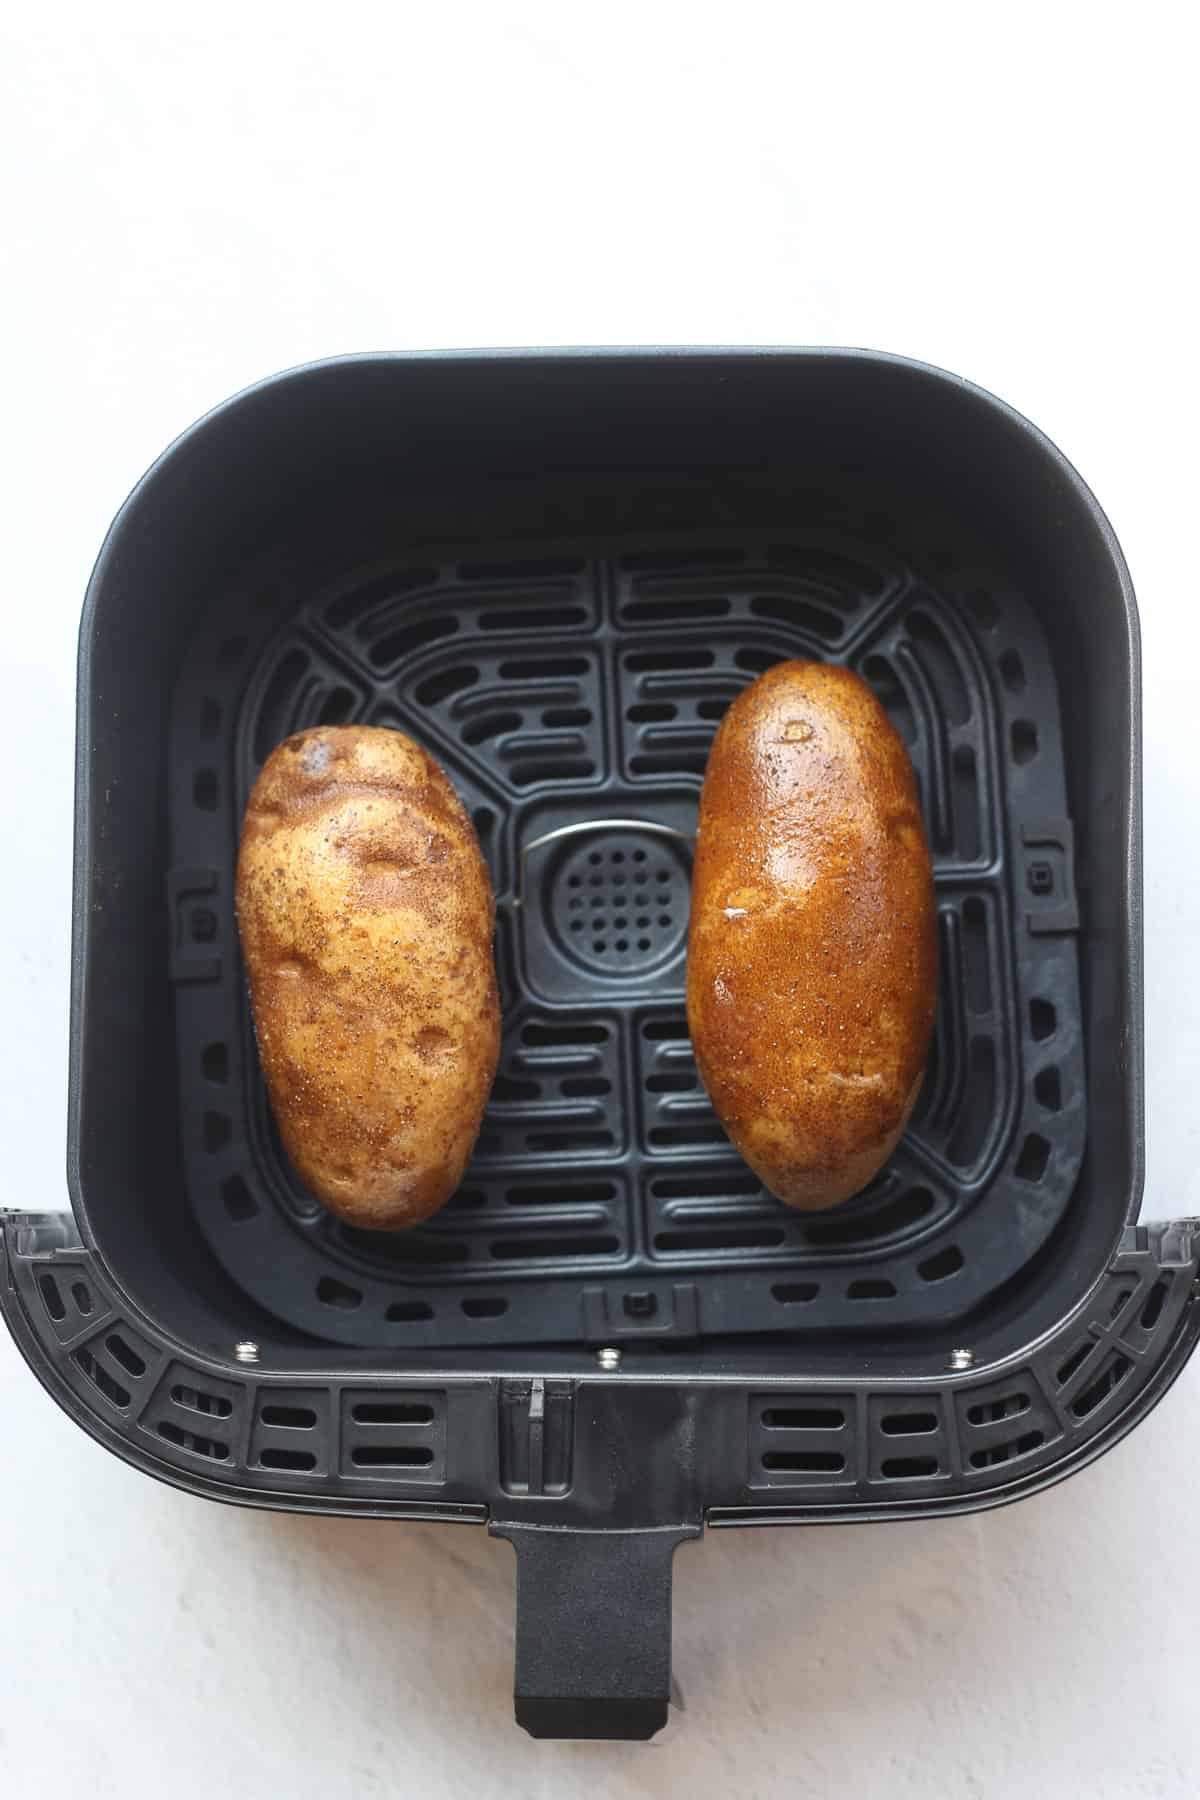 Two russet potatoes in the air fryer. 